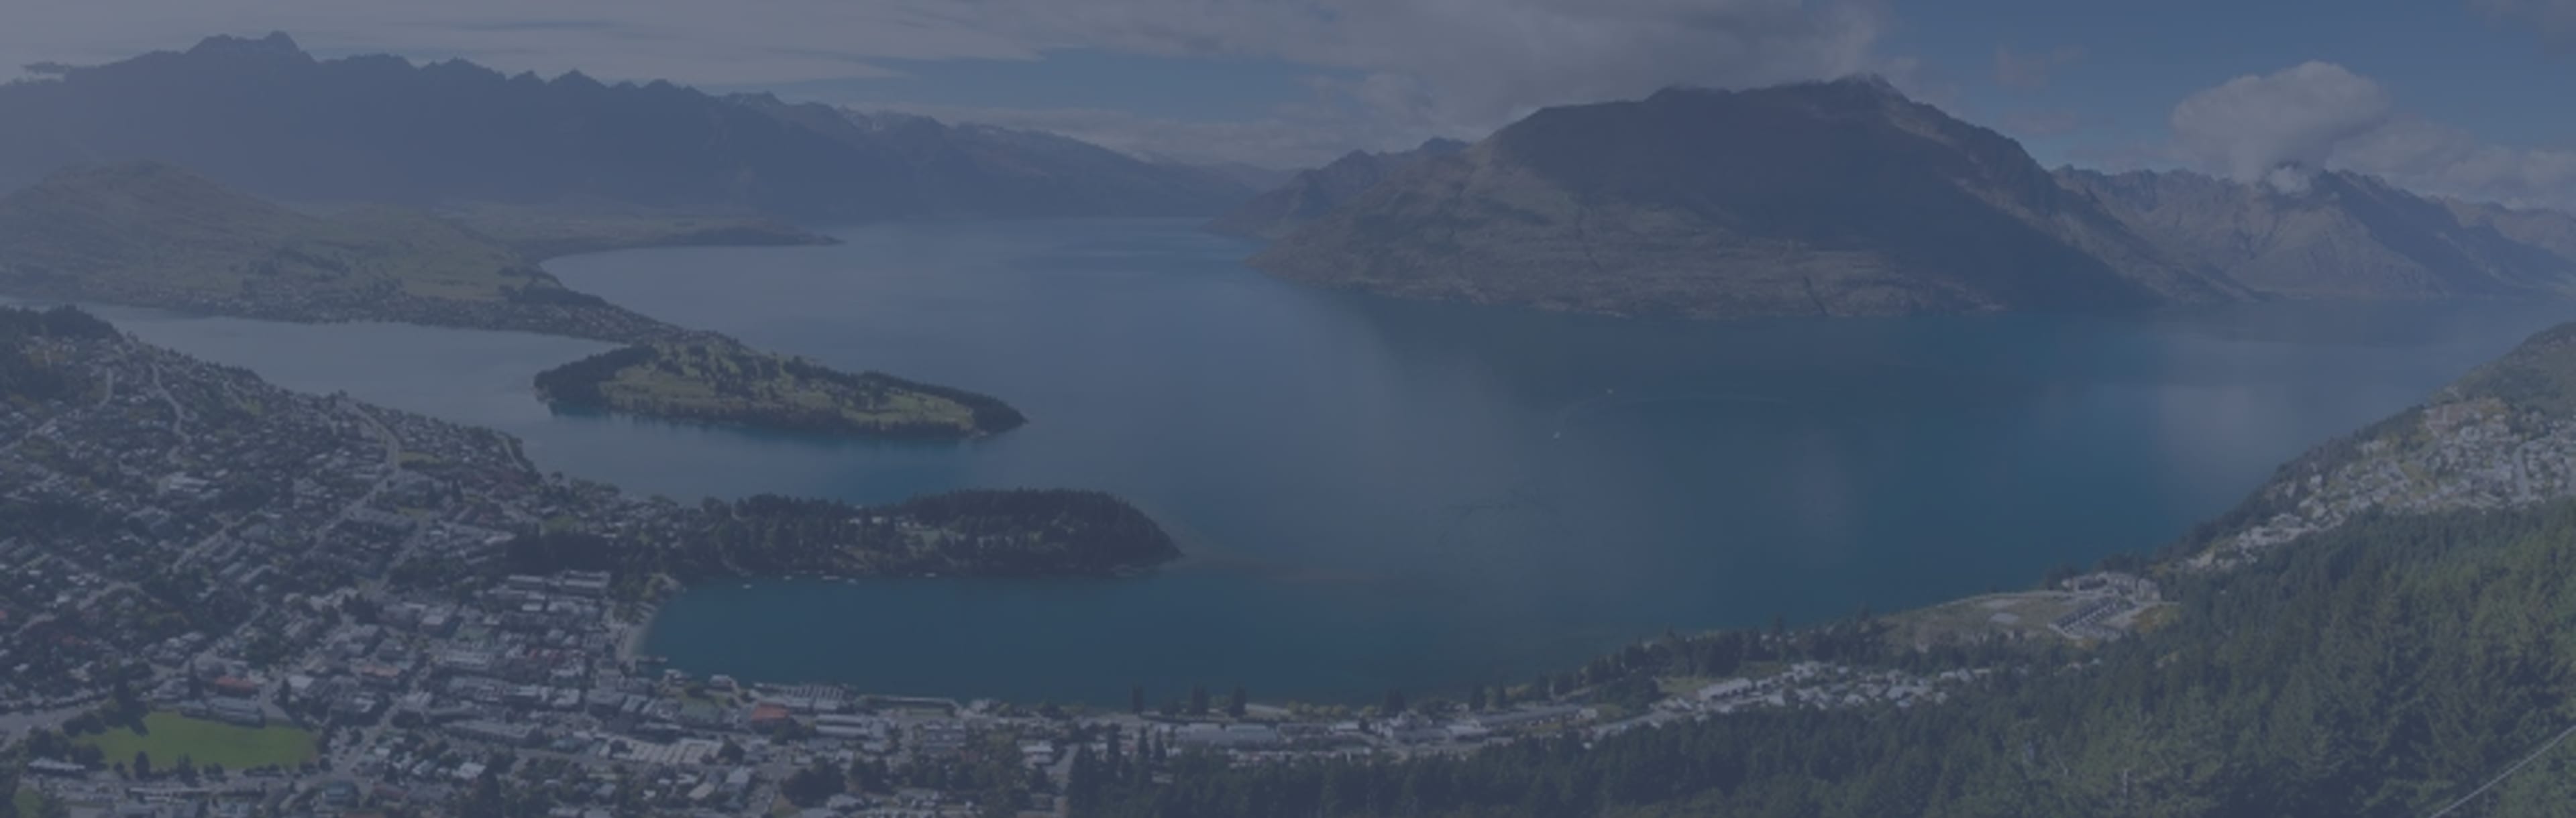 Contact Schools Directly - Compare 3 LLM Programs in New Zealand 2023